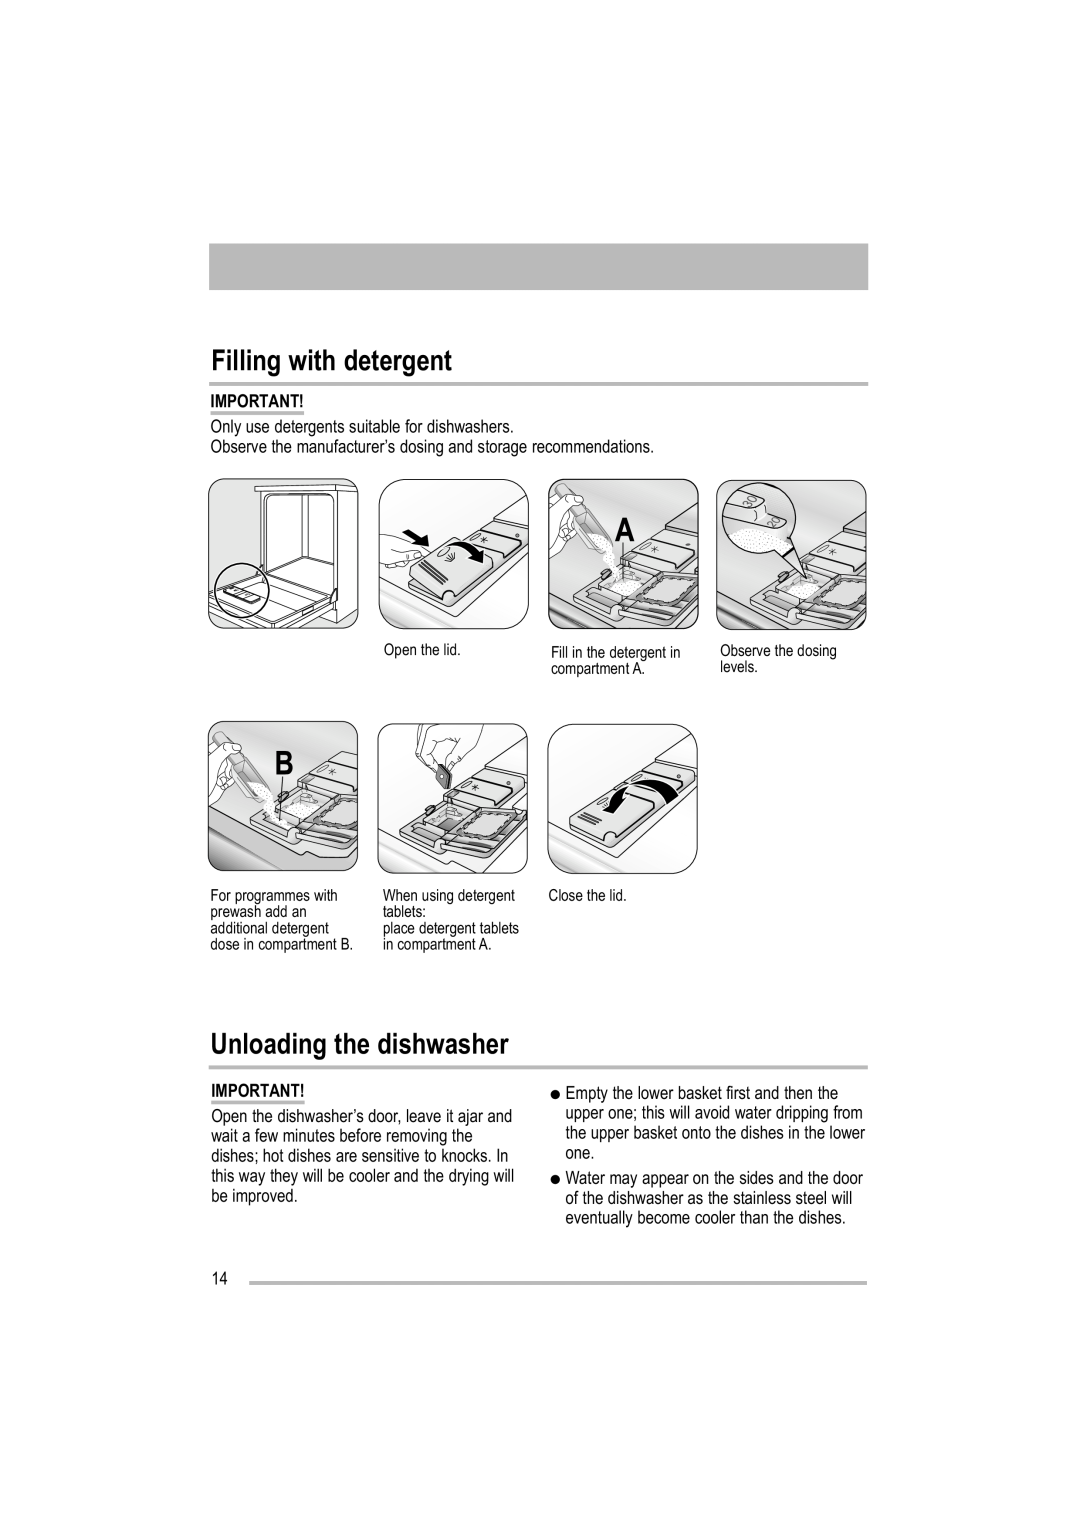 Zanussi ZDF 221 user manual Filling with detergent, Unloading the dishwasher, Only use detergents suitable for dishwashers 